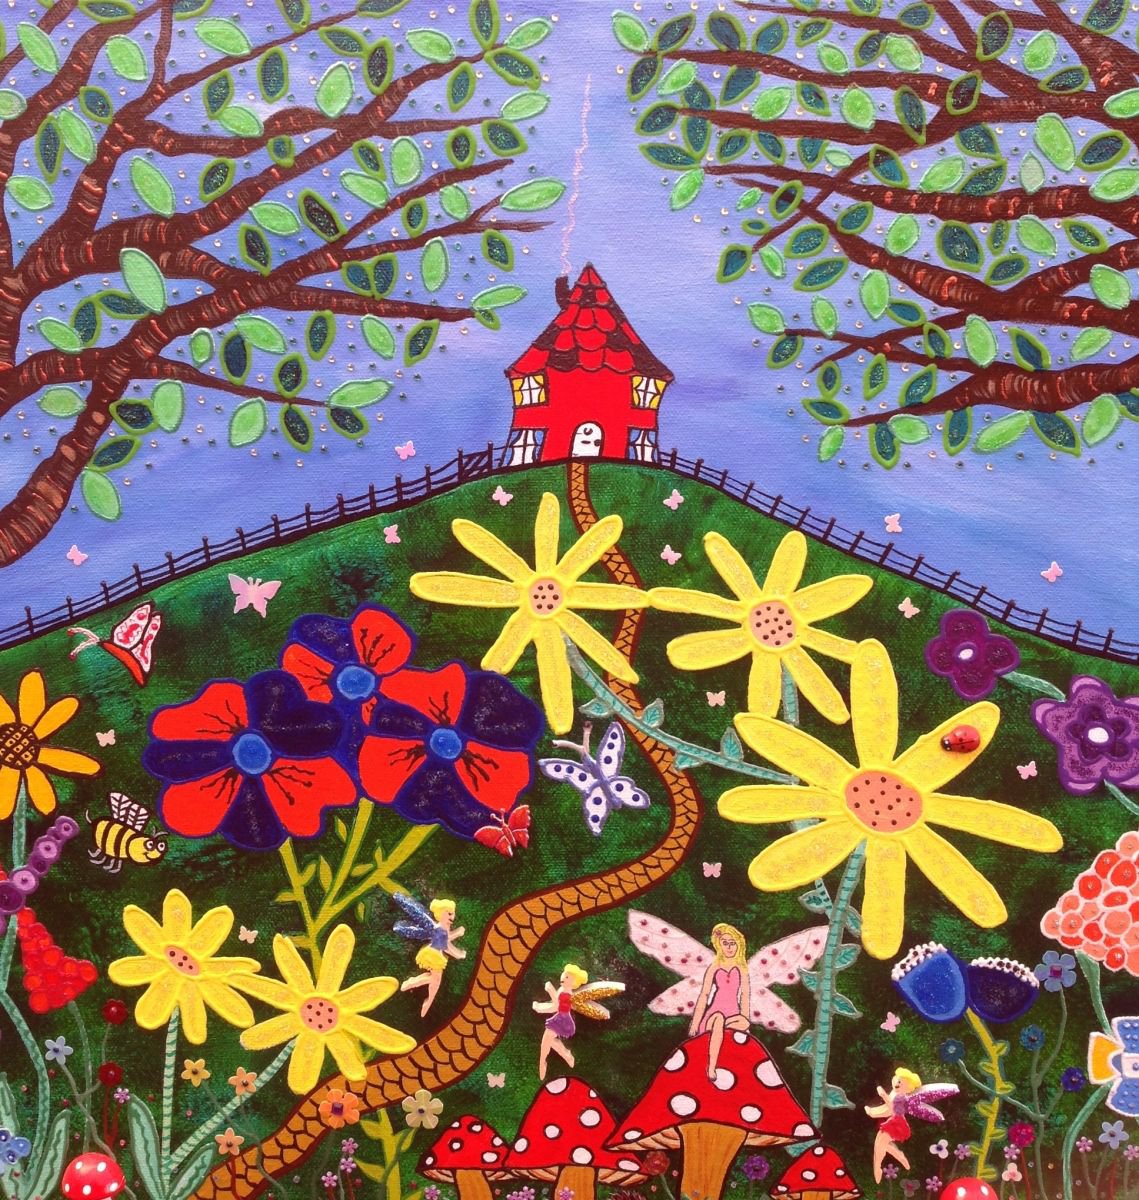 Red House On The Hill In Summer by Julie Stevenson